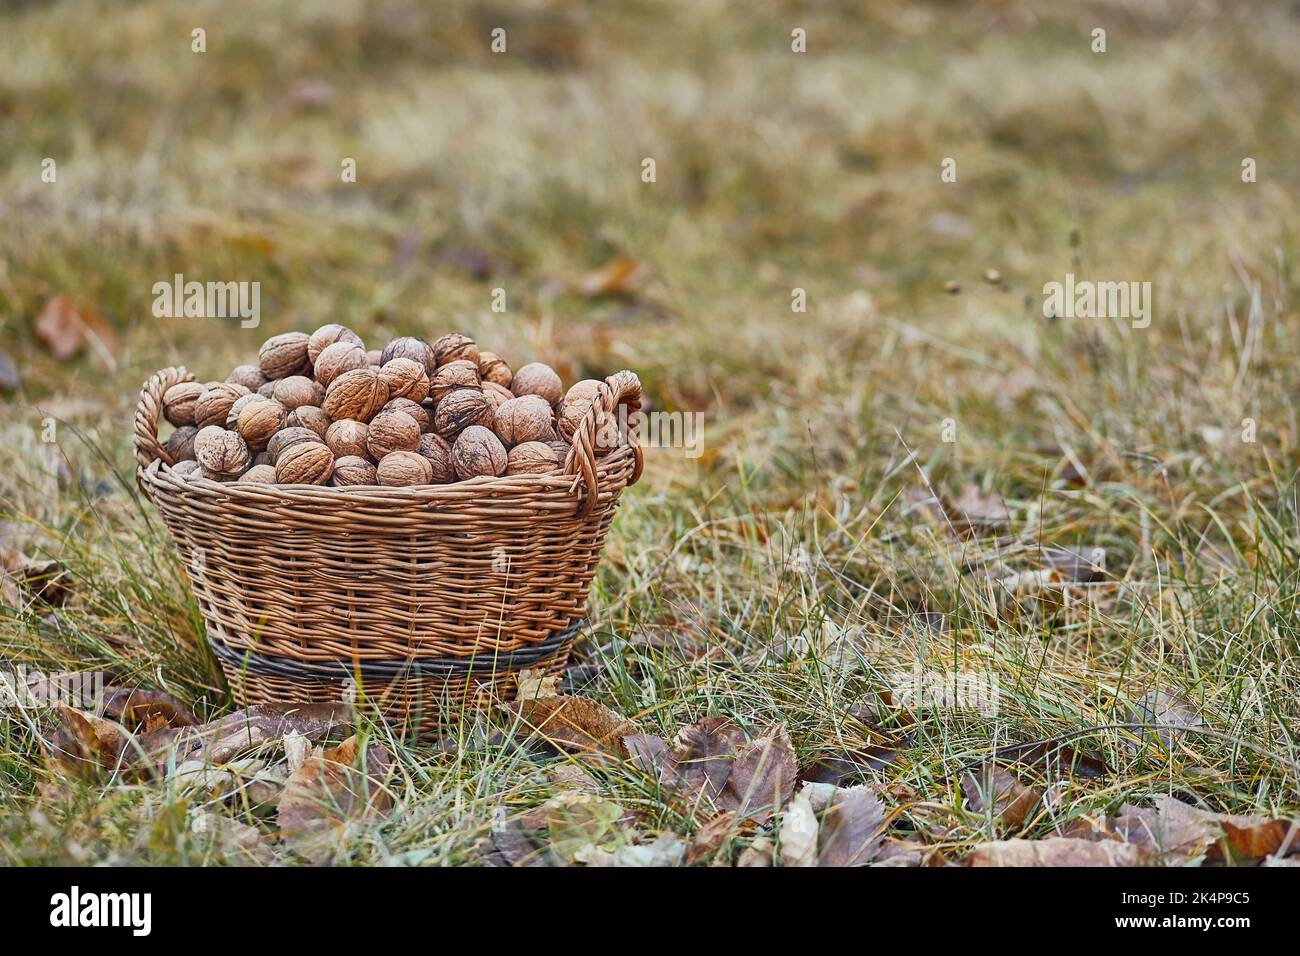 Walnuts in a basket Stock Photo